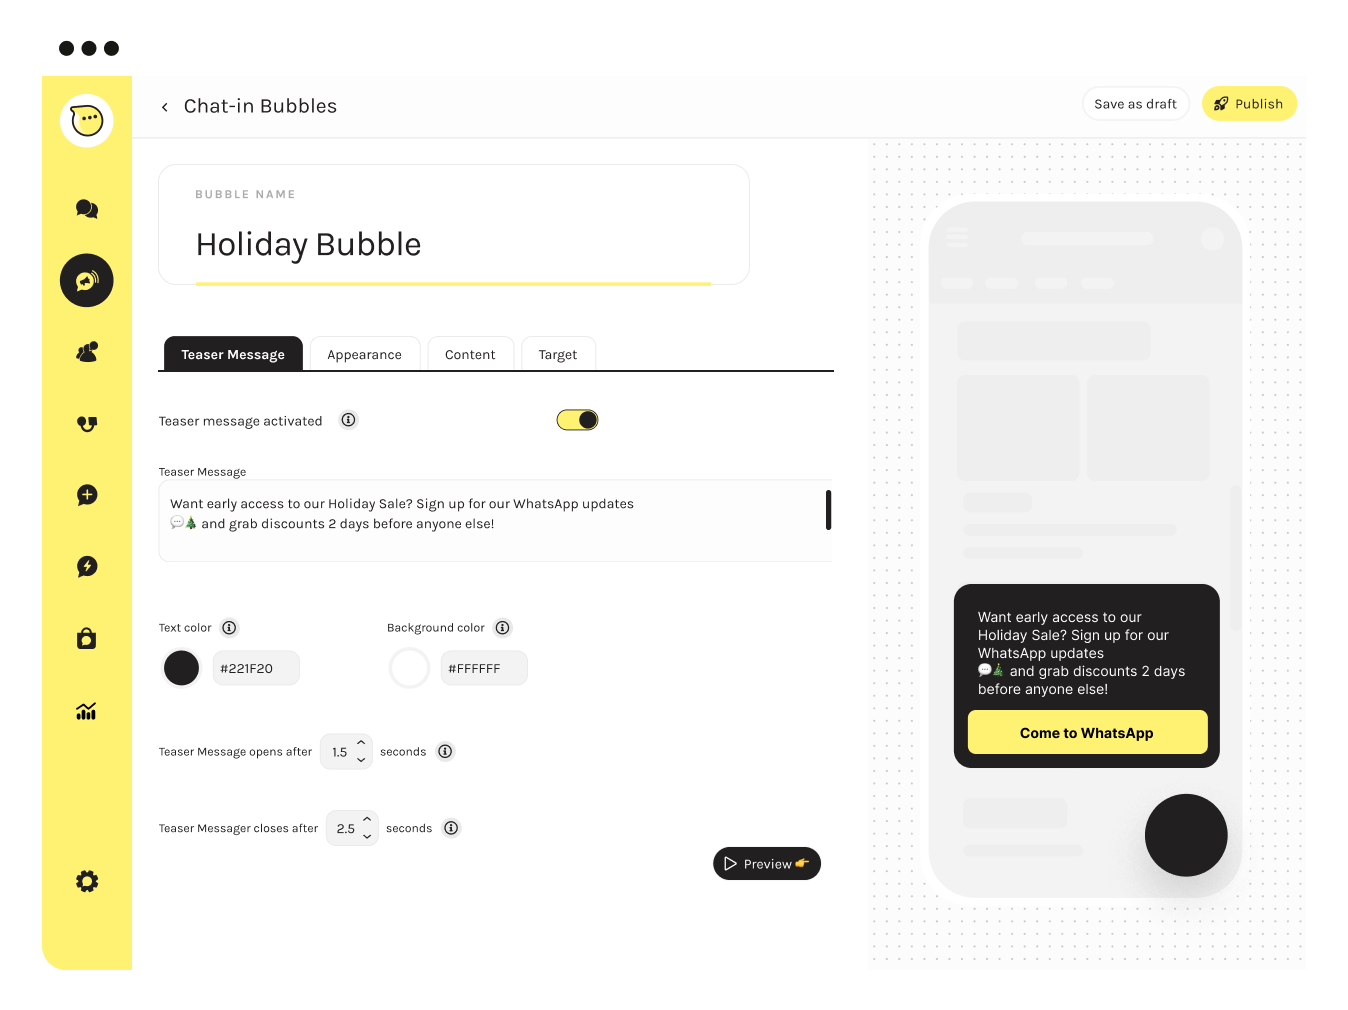 Screenshot of a Charles 'Chat-in Bubbles' interface for customizing holiday message bubbles with preview on a mobile phone - Whatsapp Marketing